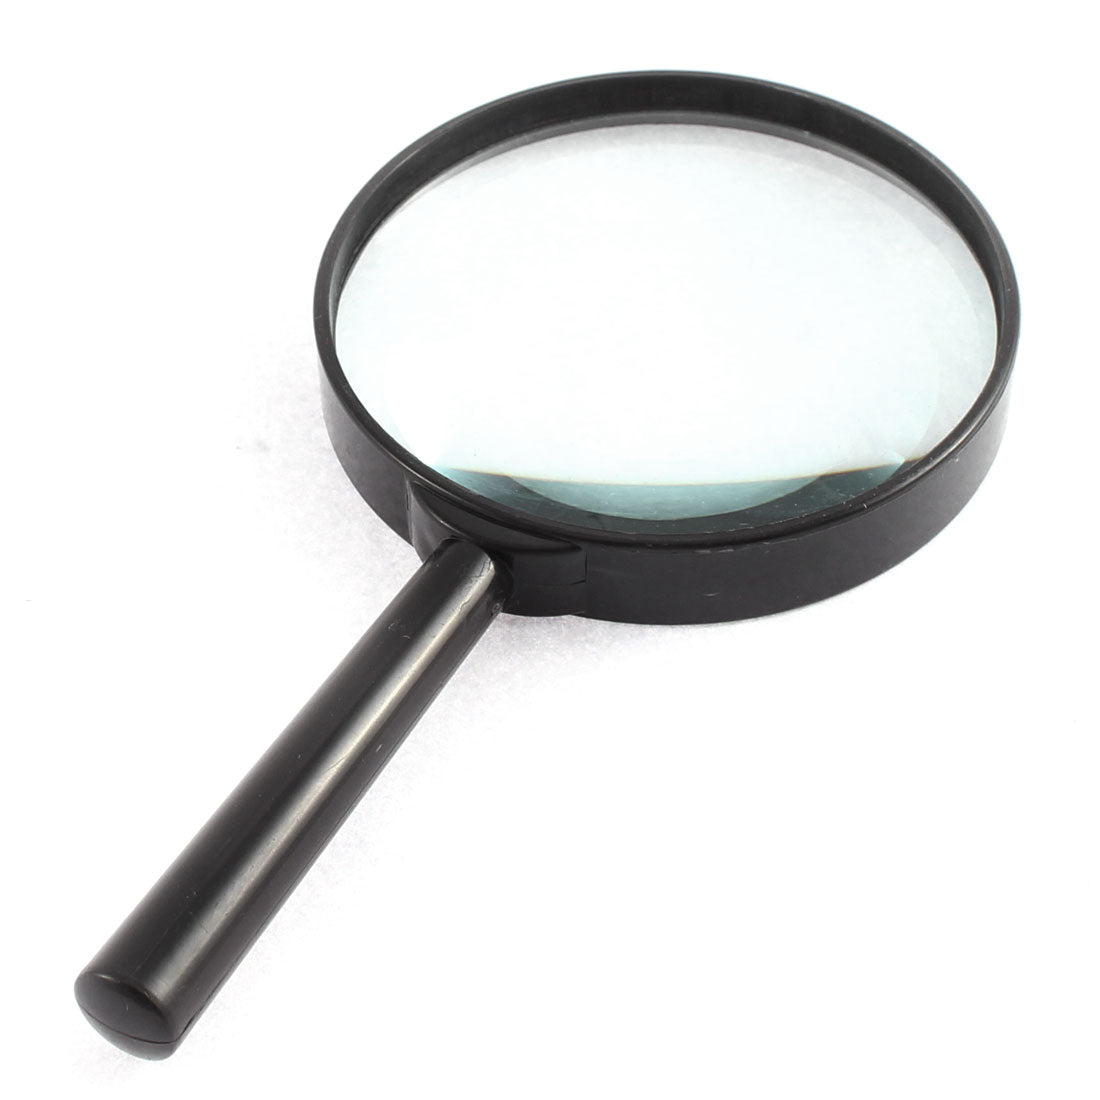 uxcell Uxcell Plastic Frame 90mm Lens 4X Handheld Magnifier Magnifying Glass Jewelry Loupe